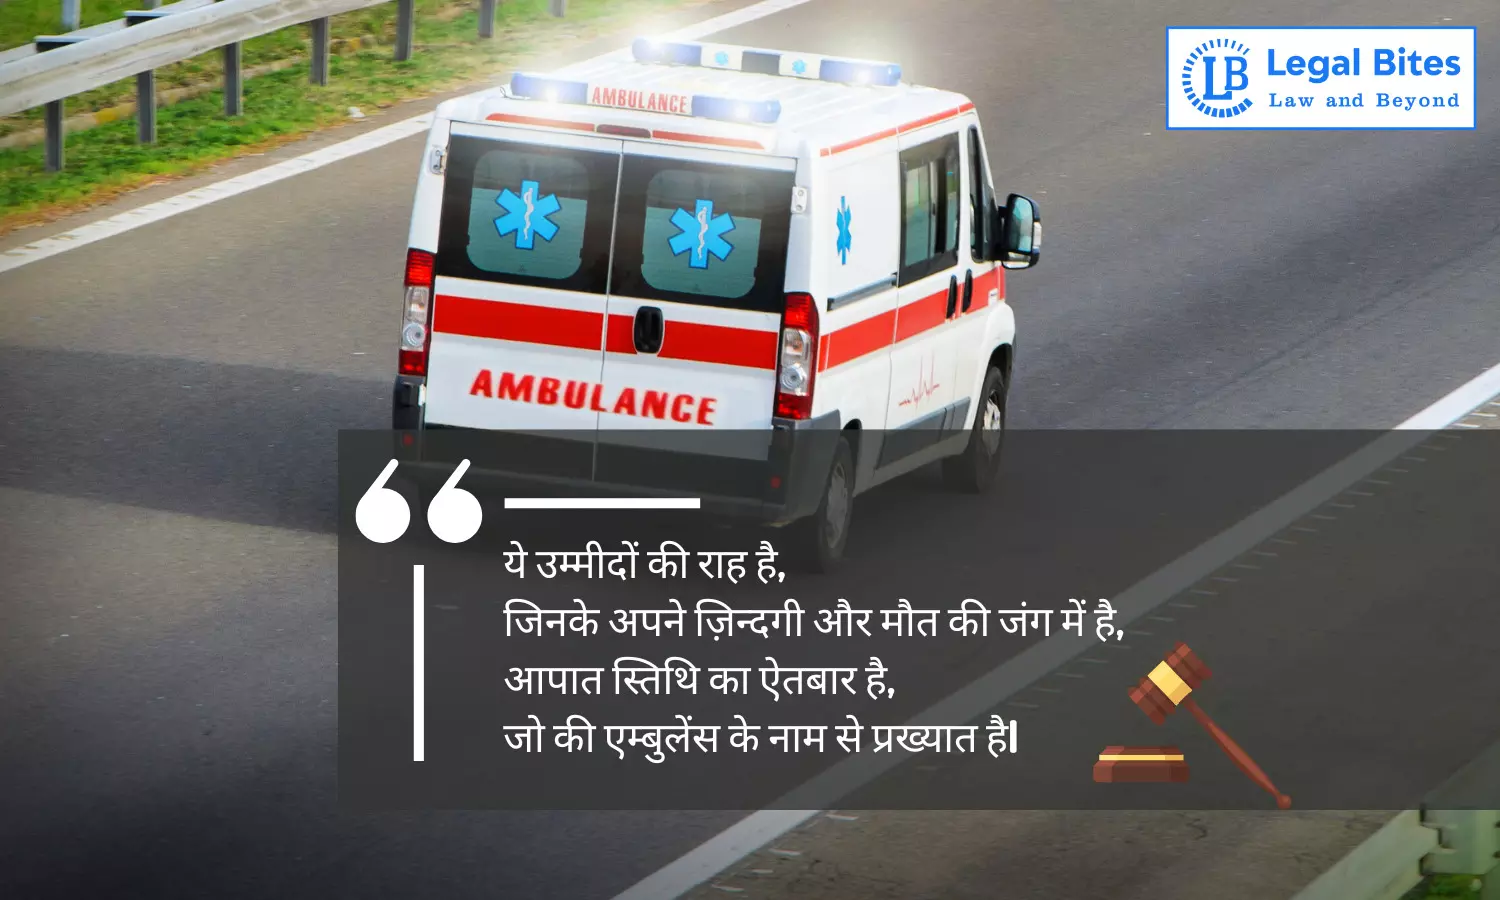 Laws related to Ambulances in India